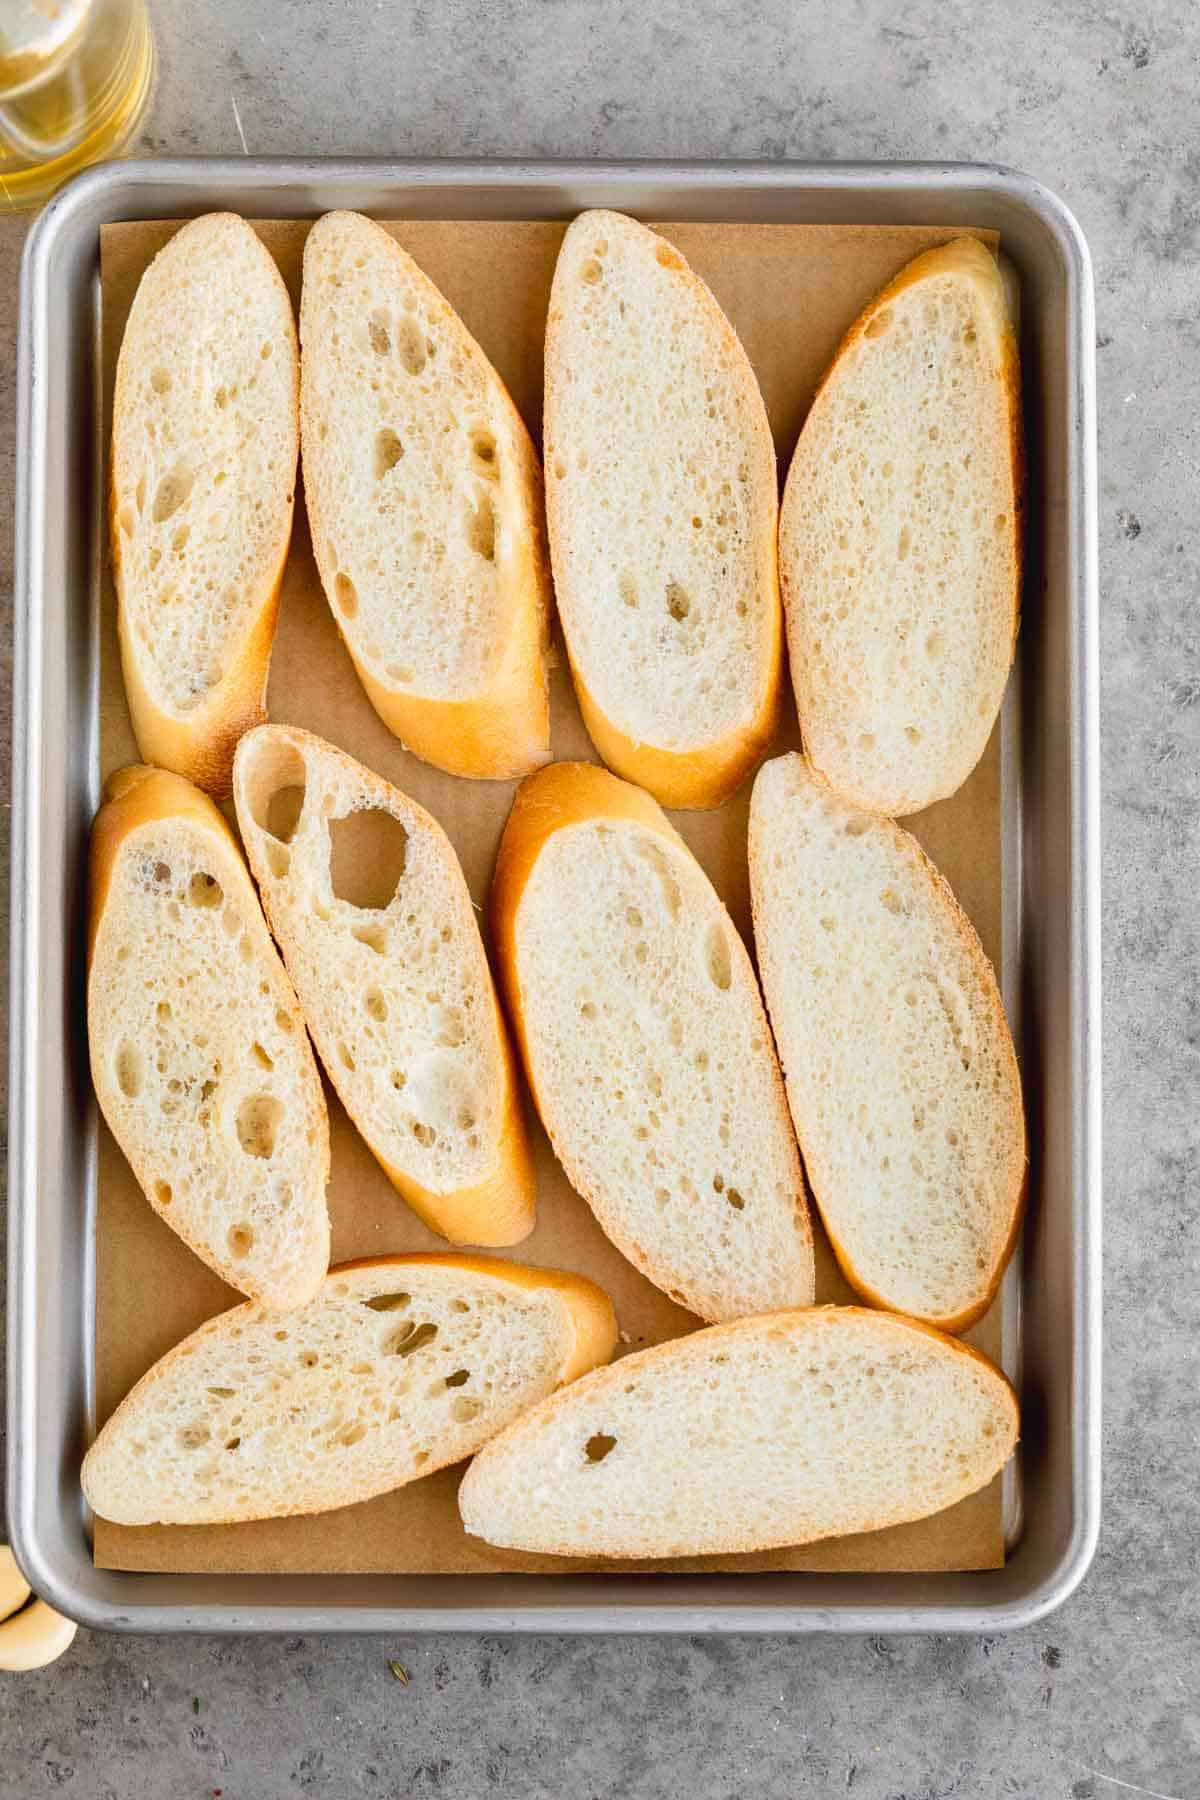 Toasted baguette slices on a sheet tray.